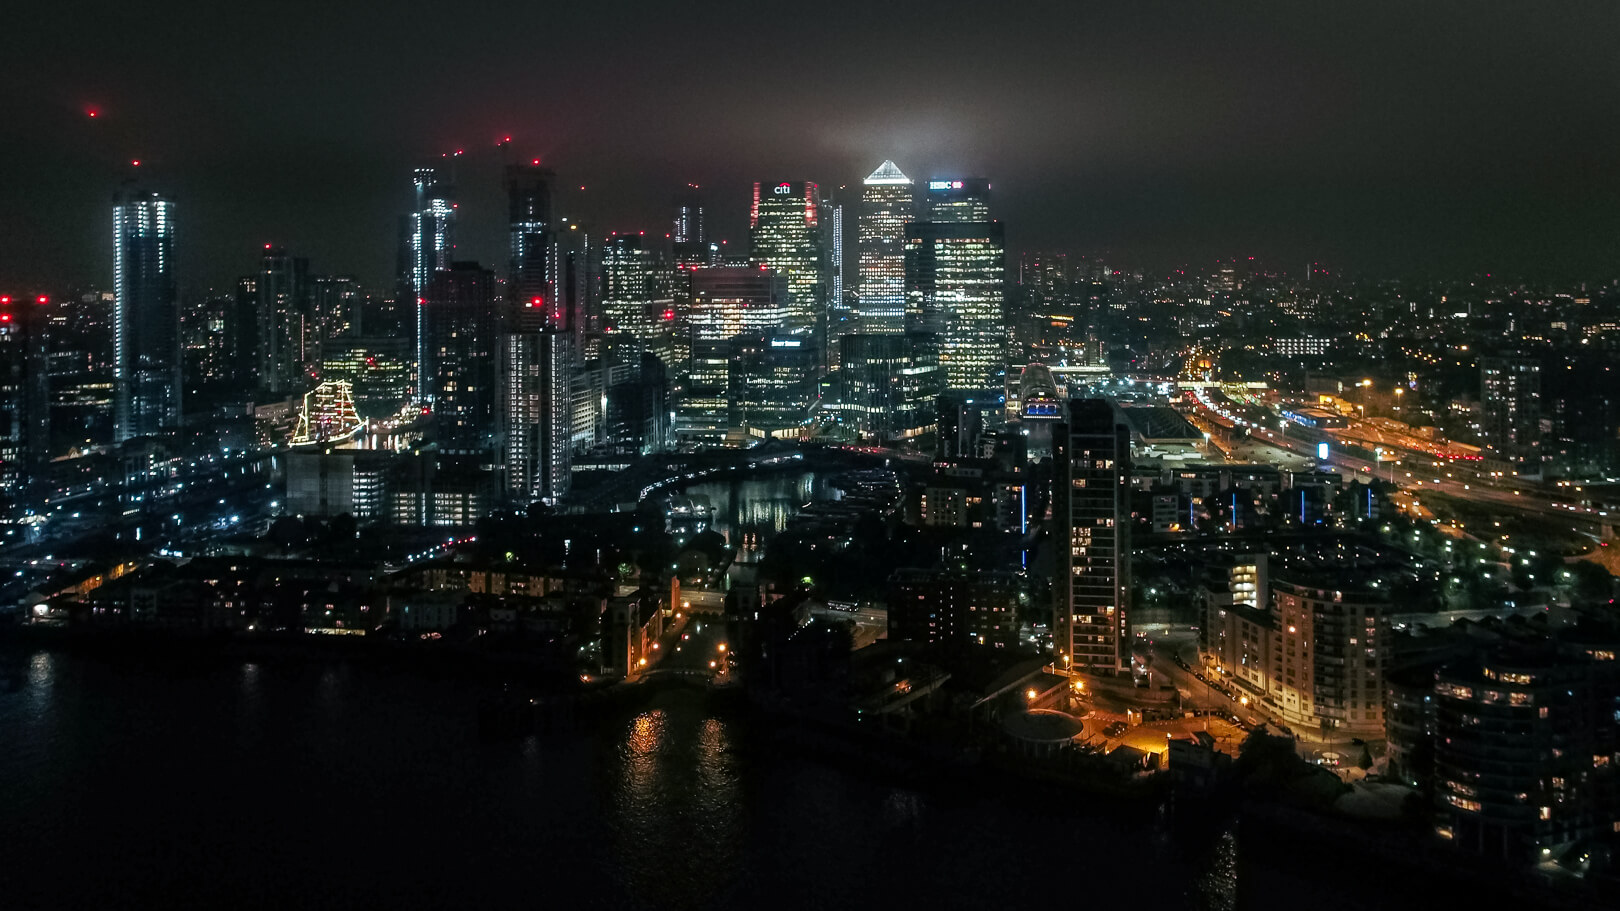 Commercial architecture, interior & aerial photography - Aerial drone photography at night, Canary Wharf, London